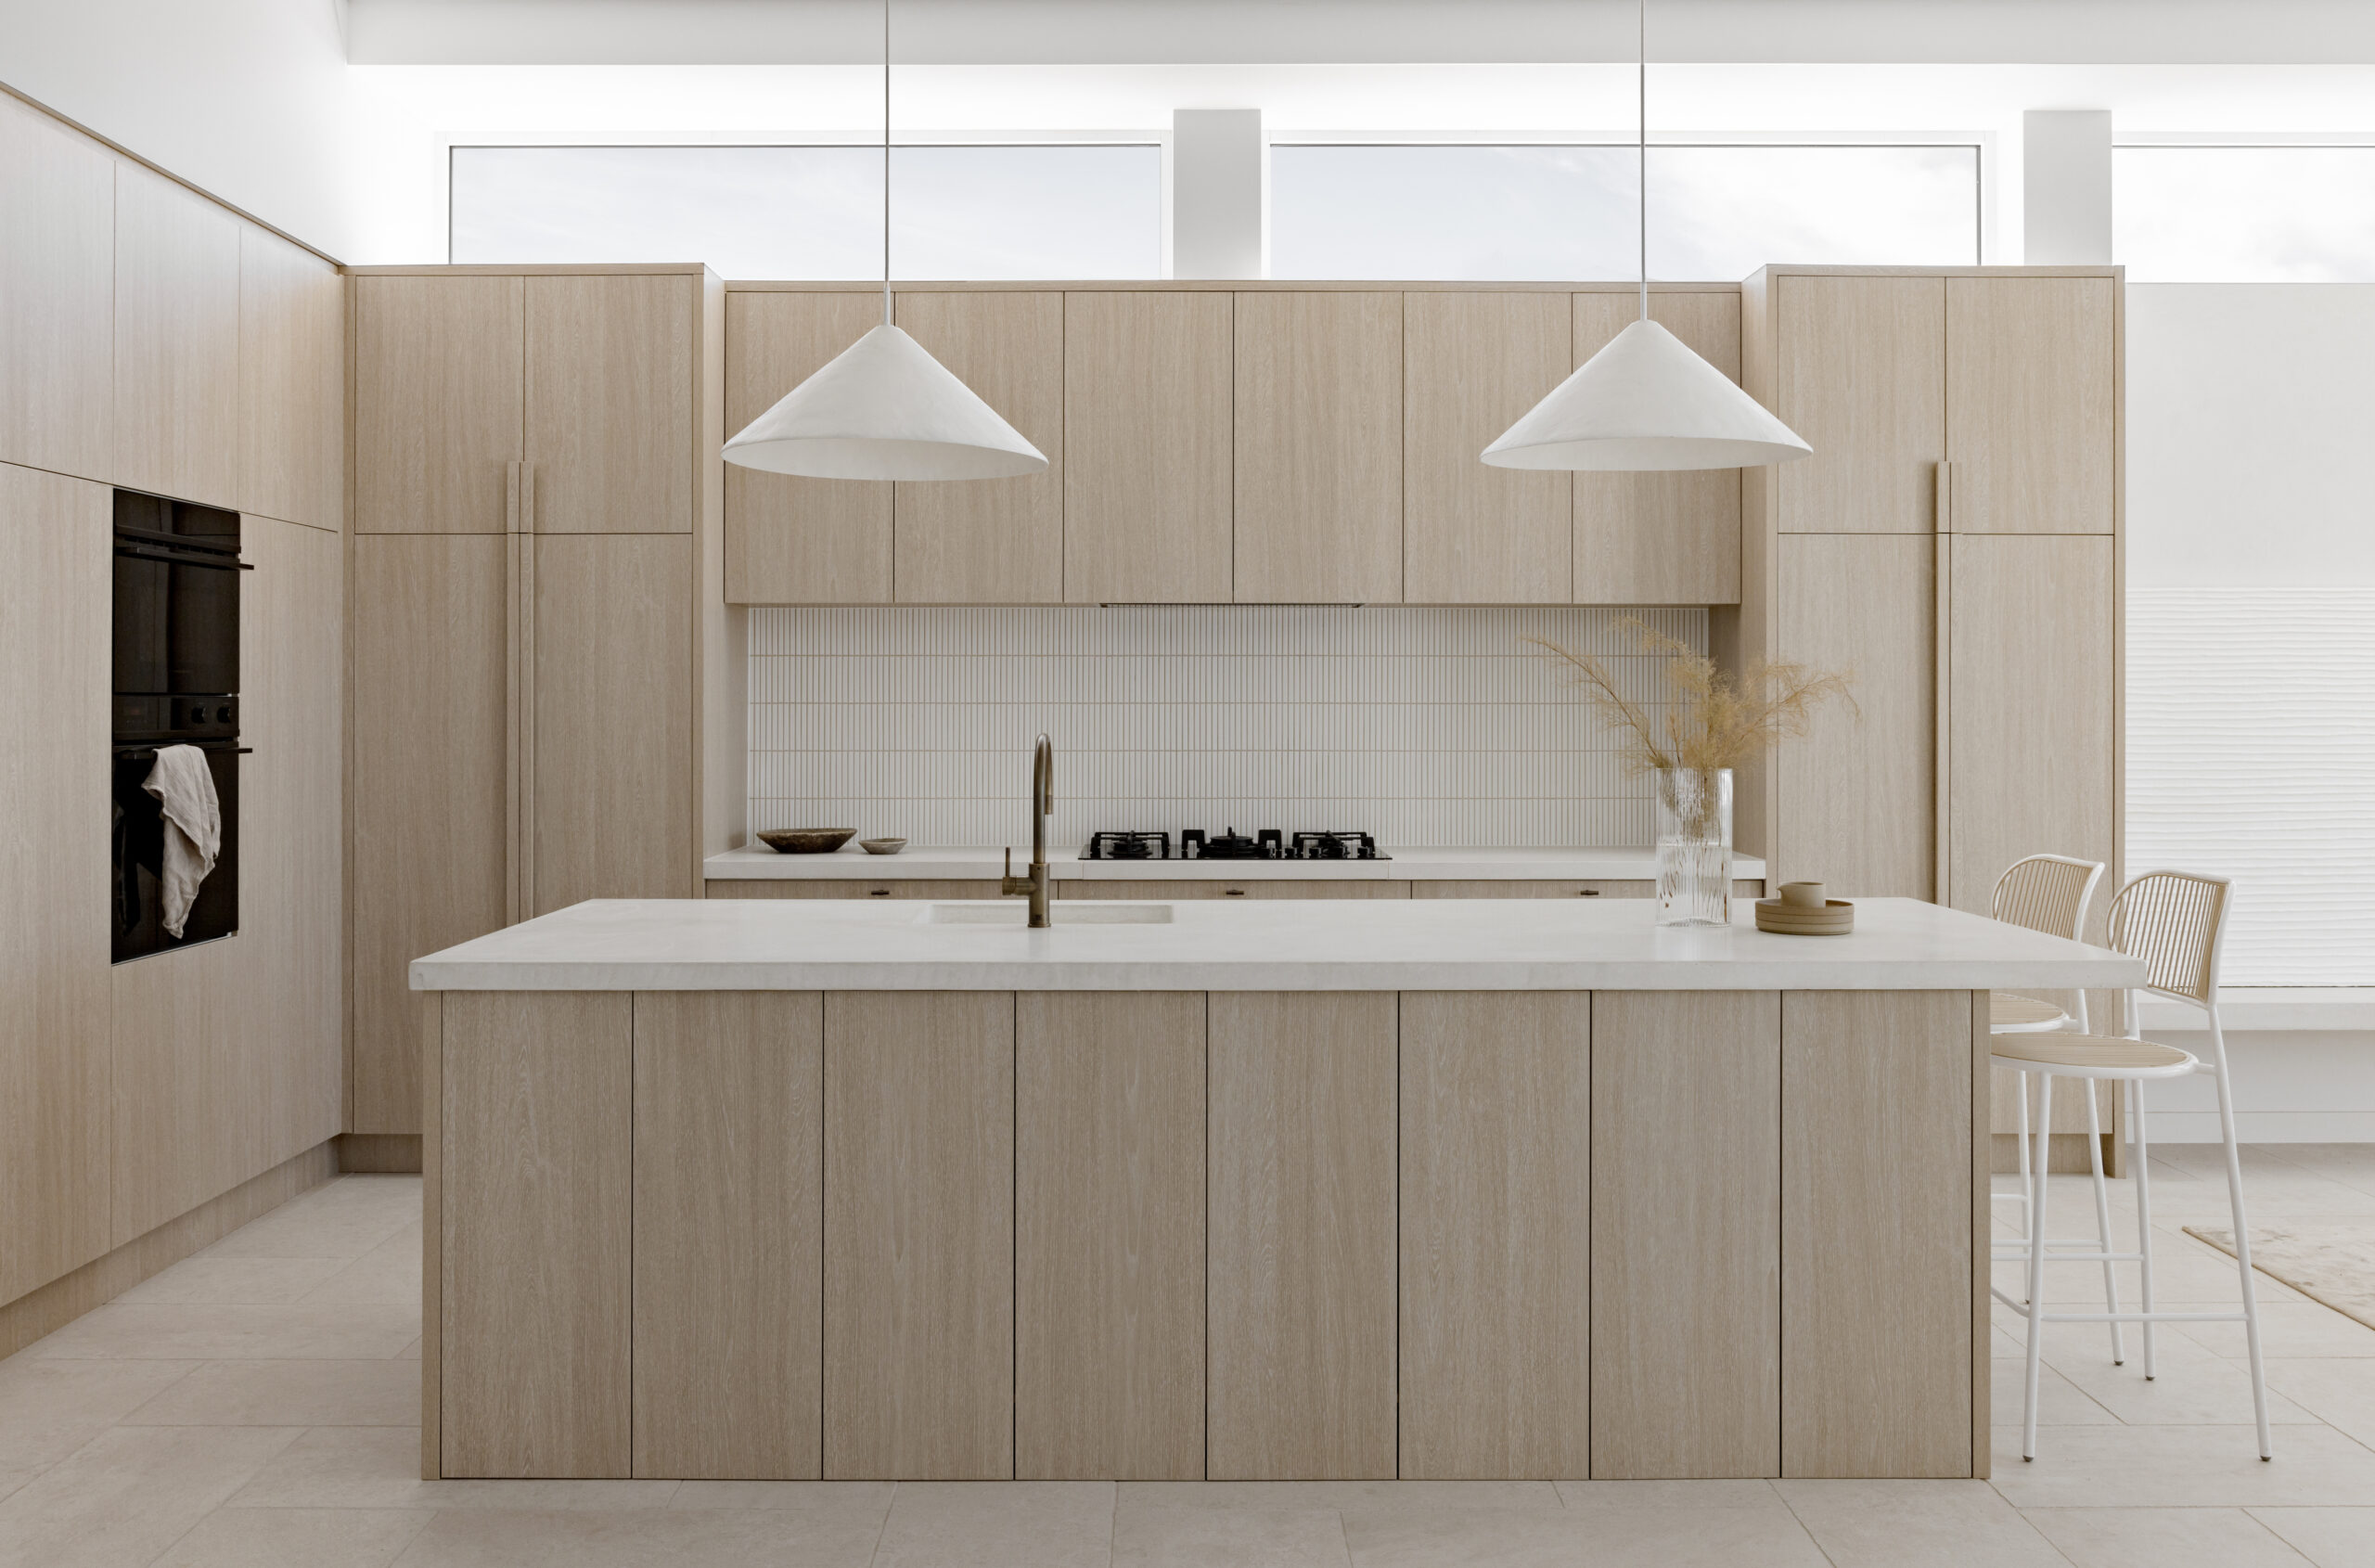 Clisby Way kitchen in light timber and white featuring Iver Brunswick pull handles in matt black.